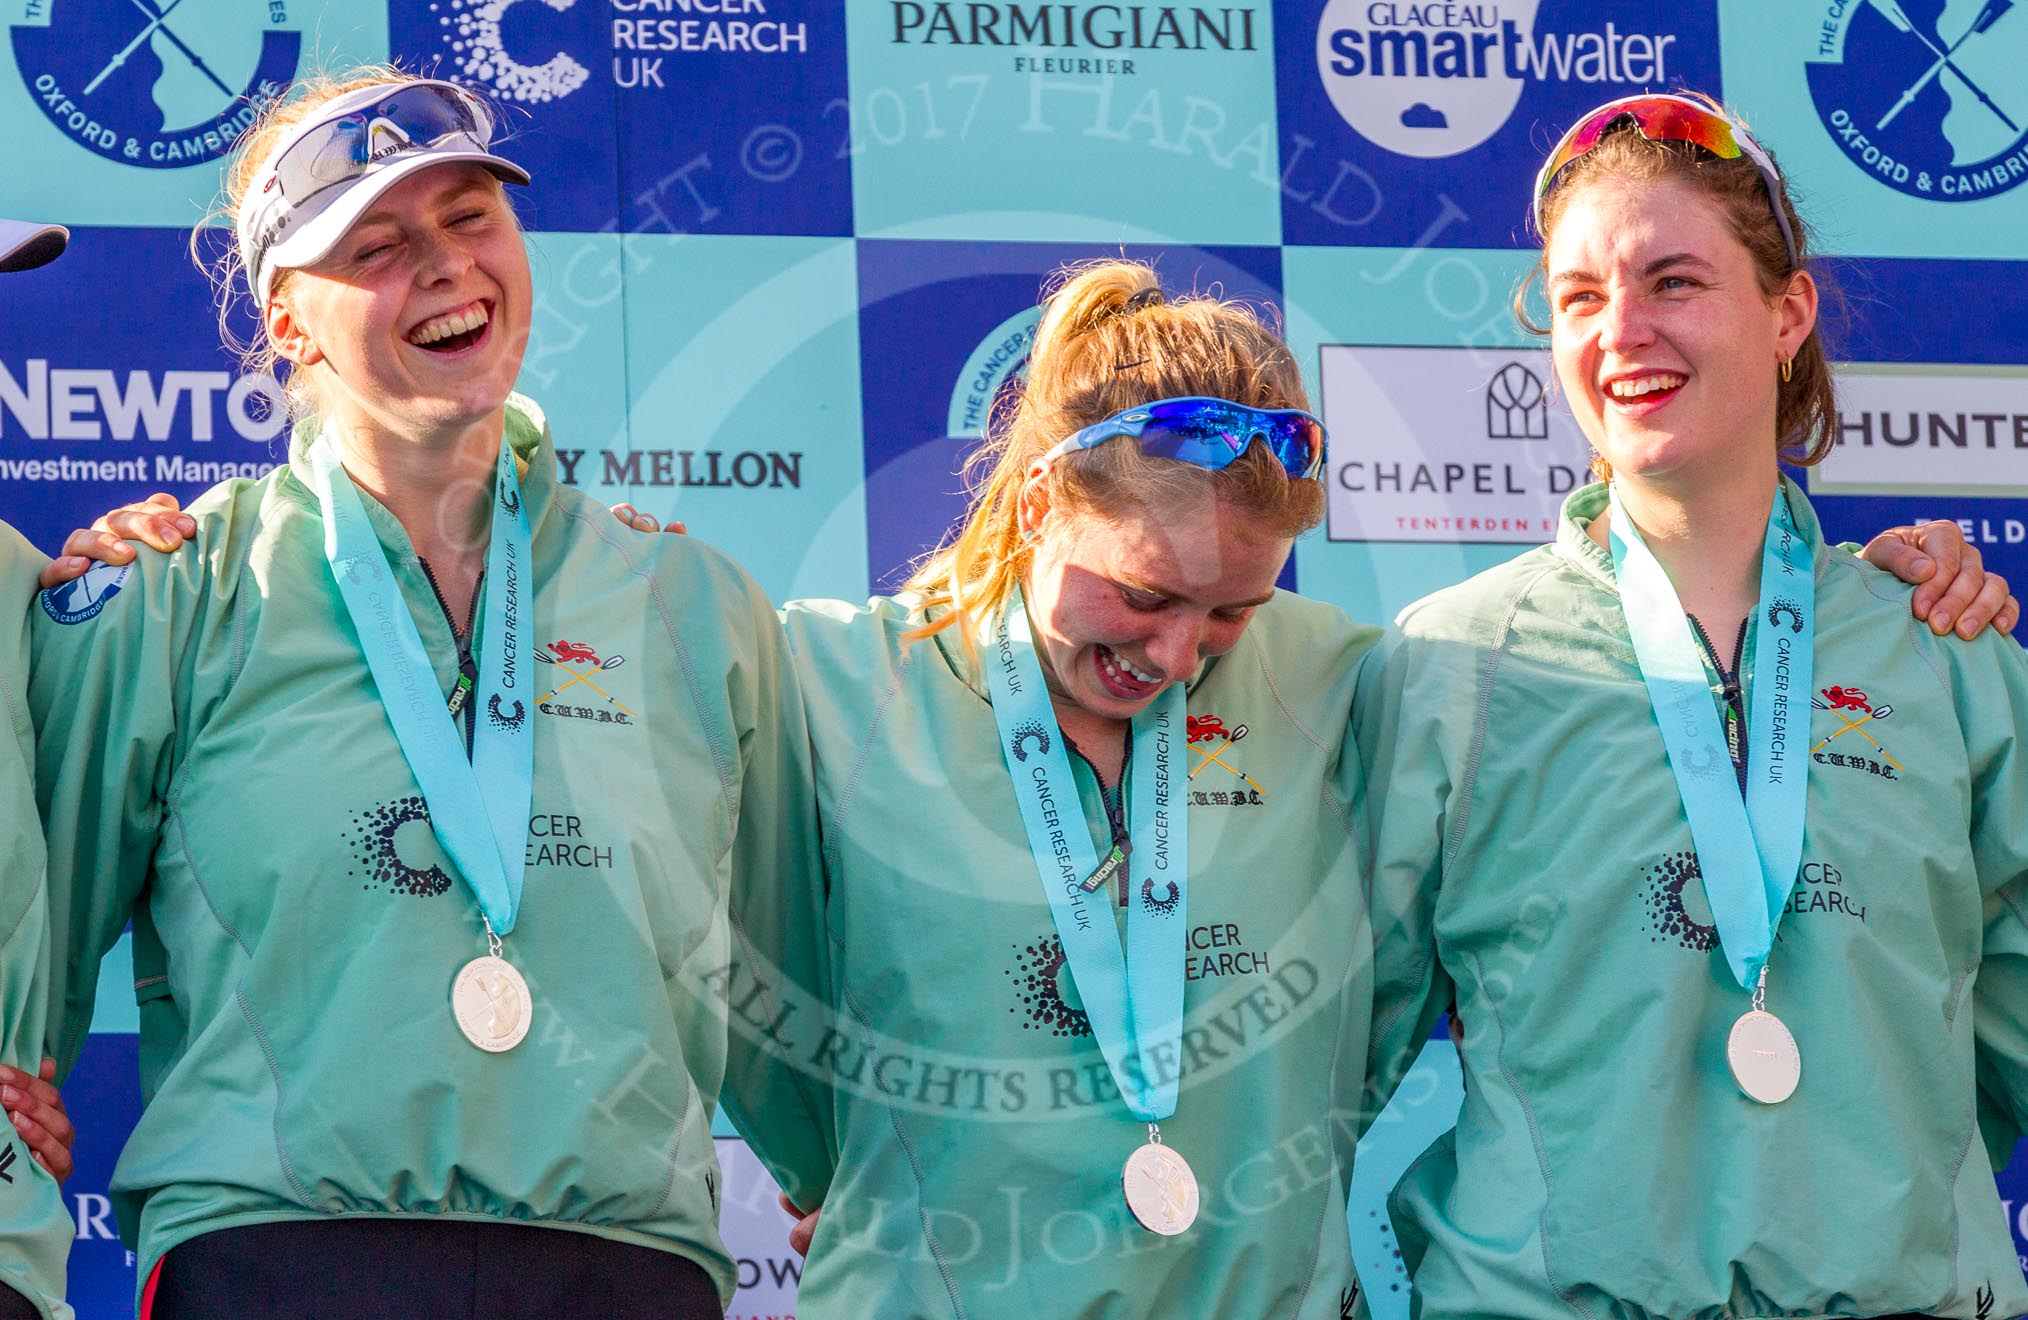 The Boat Race season 2017 -  The Cancer Research Women's Boat Race: CUWBC at the price giving - 5 seat Holly Hill, 6 seat Alice White, 7 seat Myriam Goudet.
River Thames between Putney Bridge and Mortlake,
London SW15,

United Kingdom,
on 02 April 2017 at 17:12, image #247